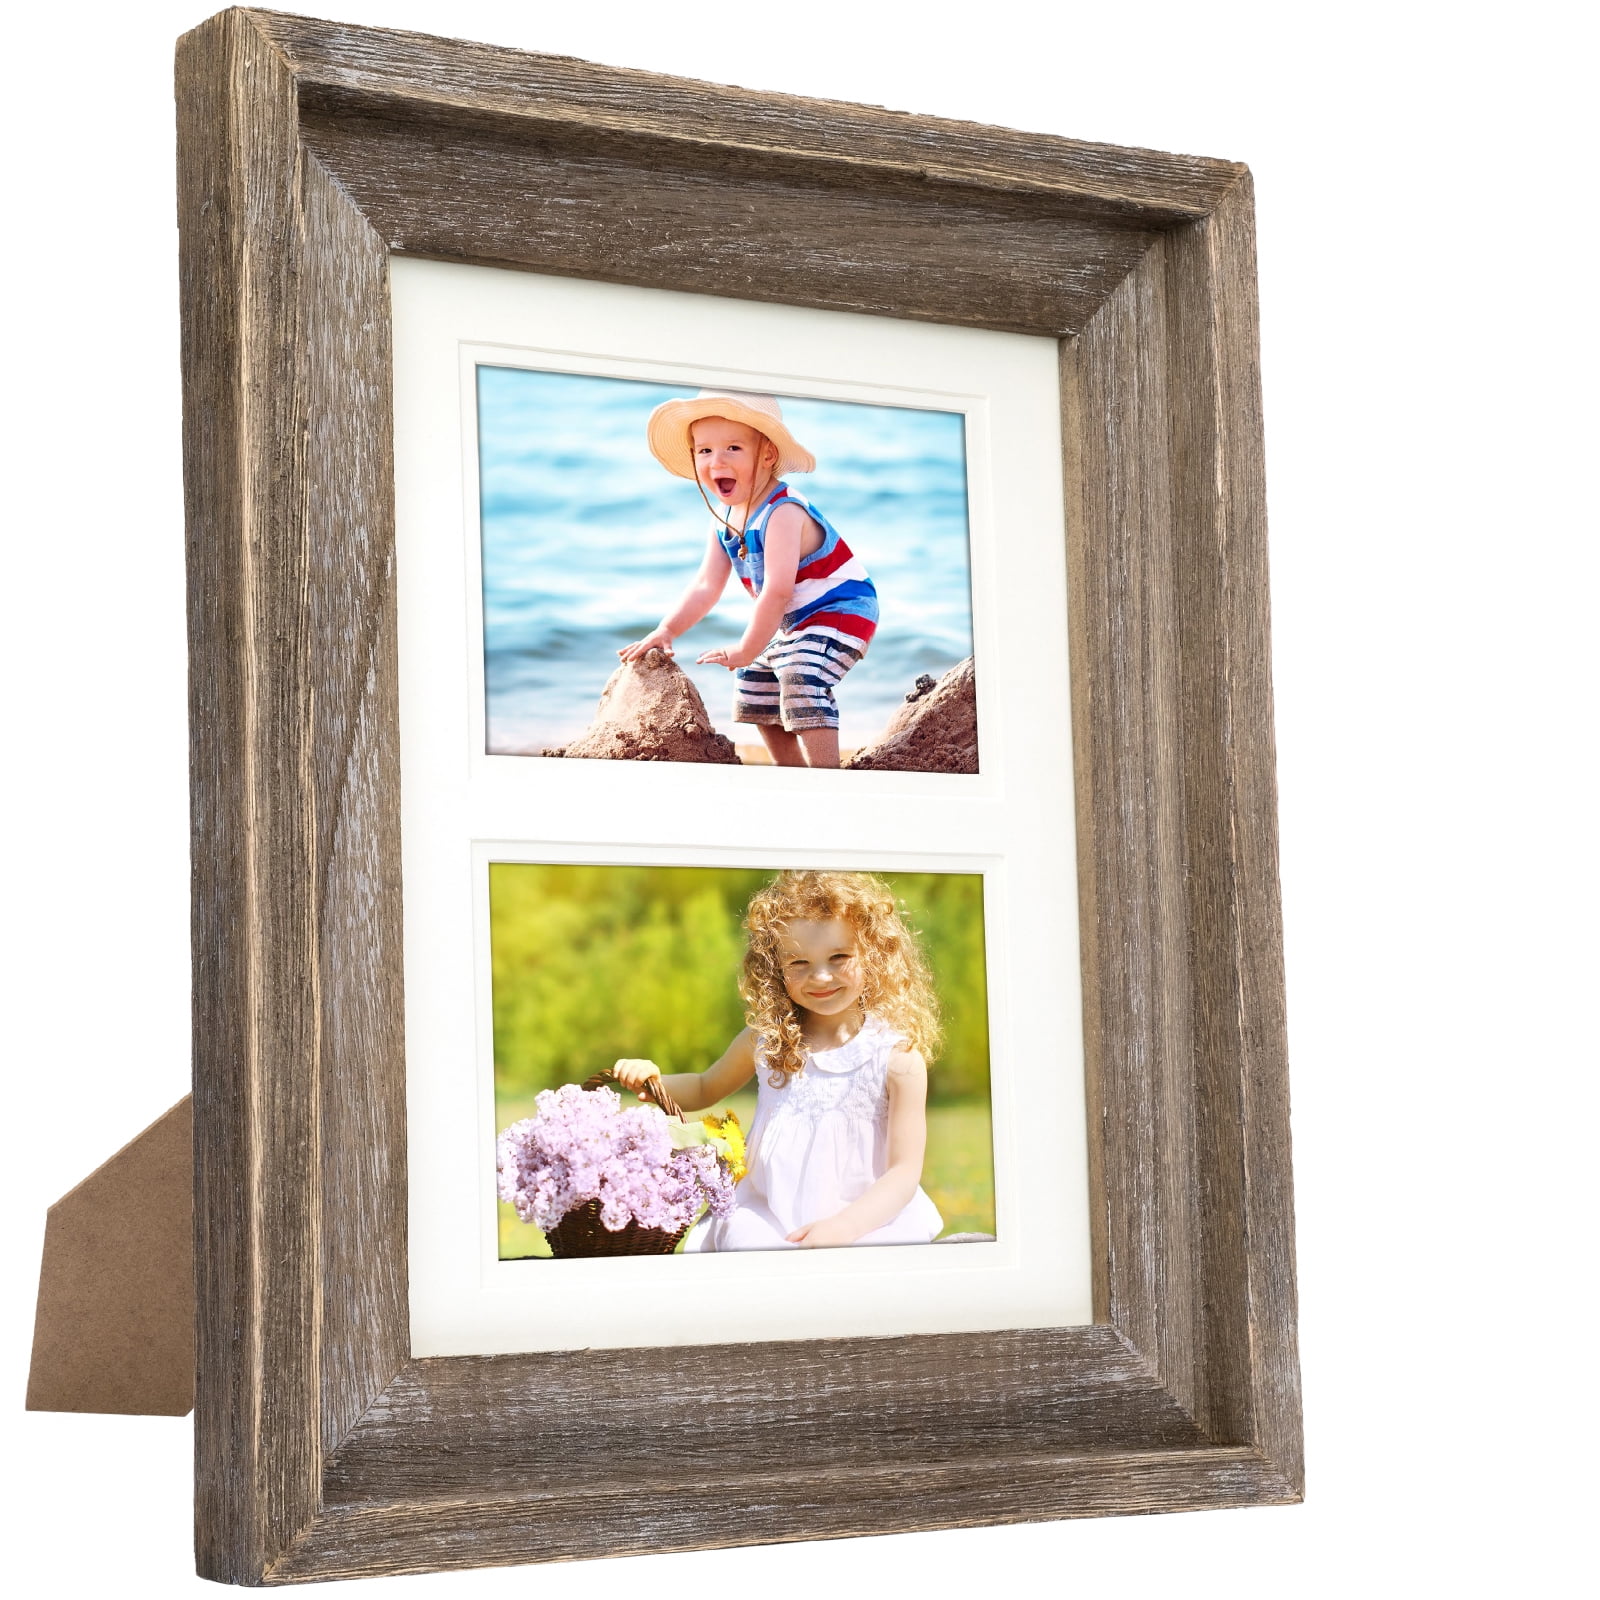 1 5x7 Barn-wood Rustic Picture Frame with Texas Star 